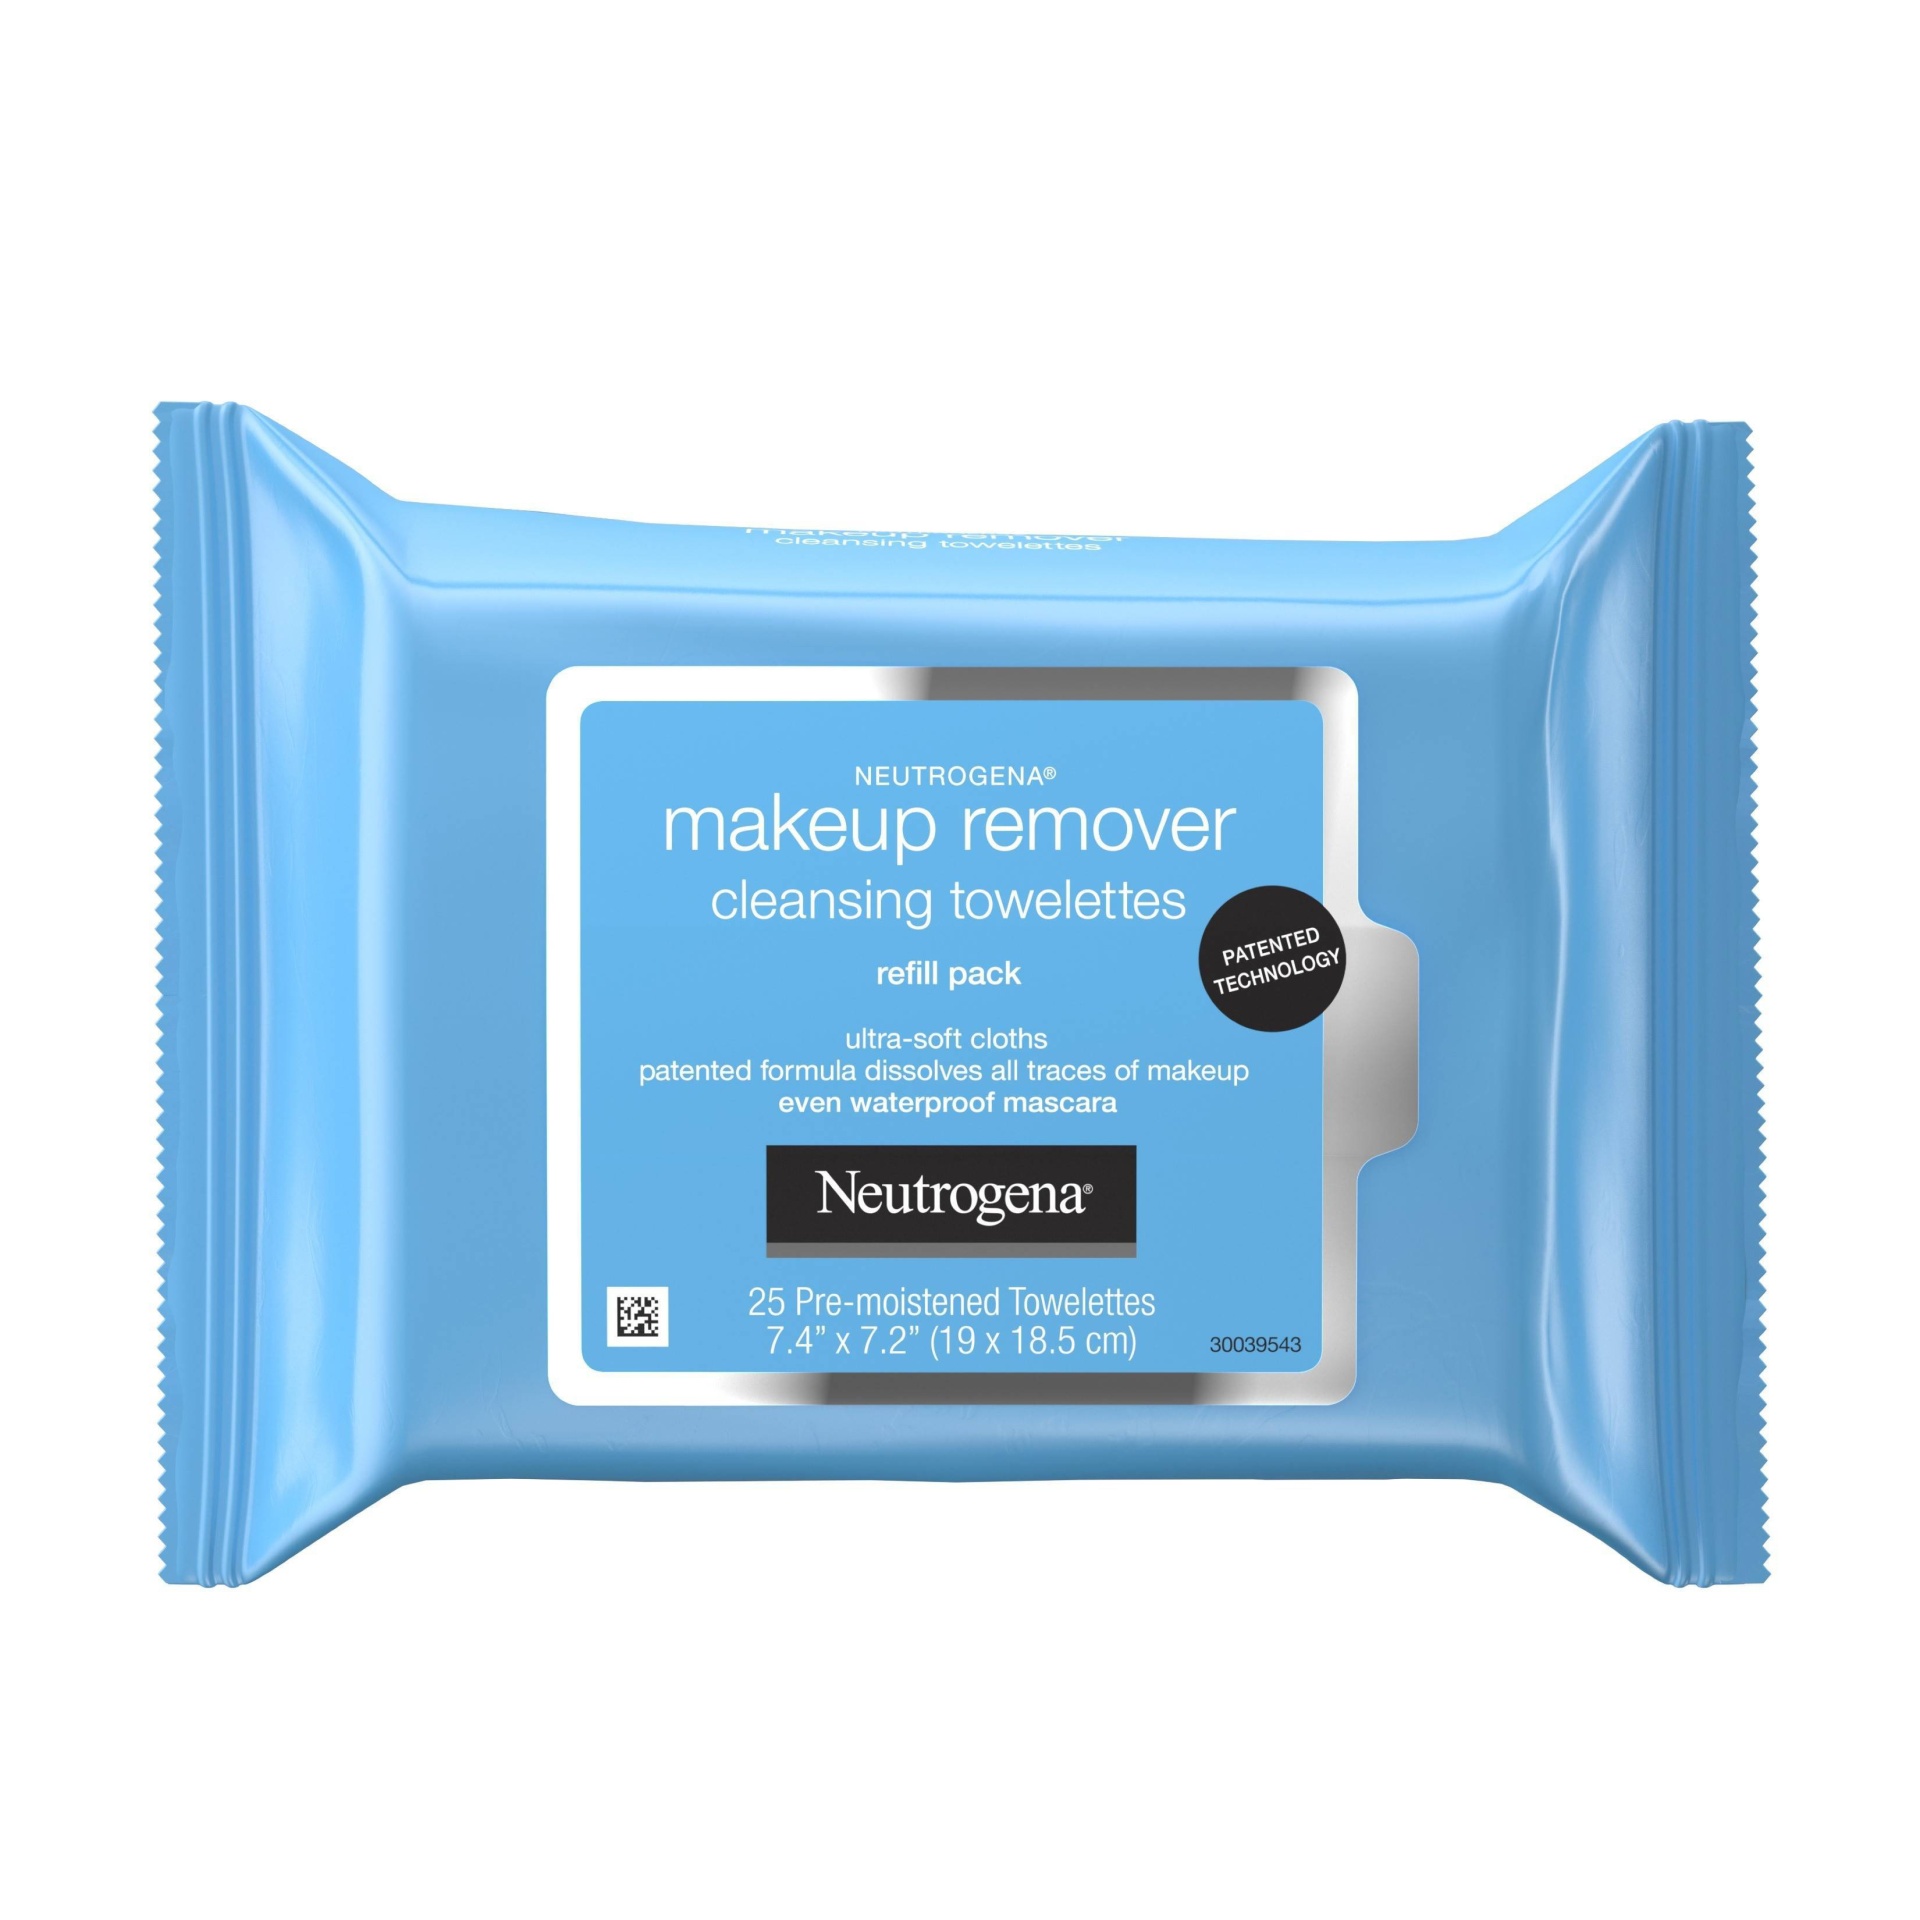 slide 1 of 6, Neutrogena Makeup Remover Cleansing Towelettes Refill Pack, 25 ct